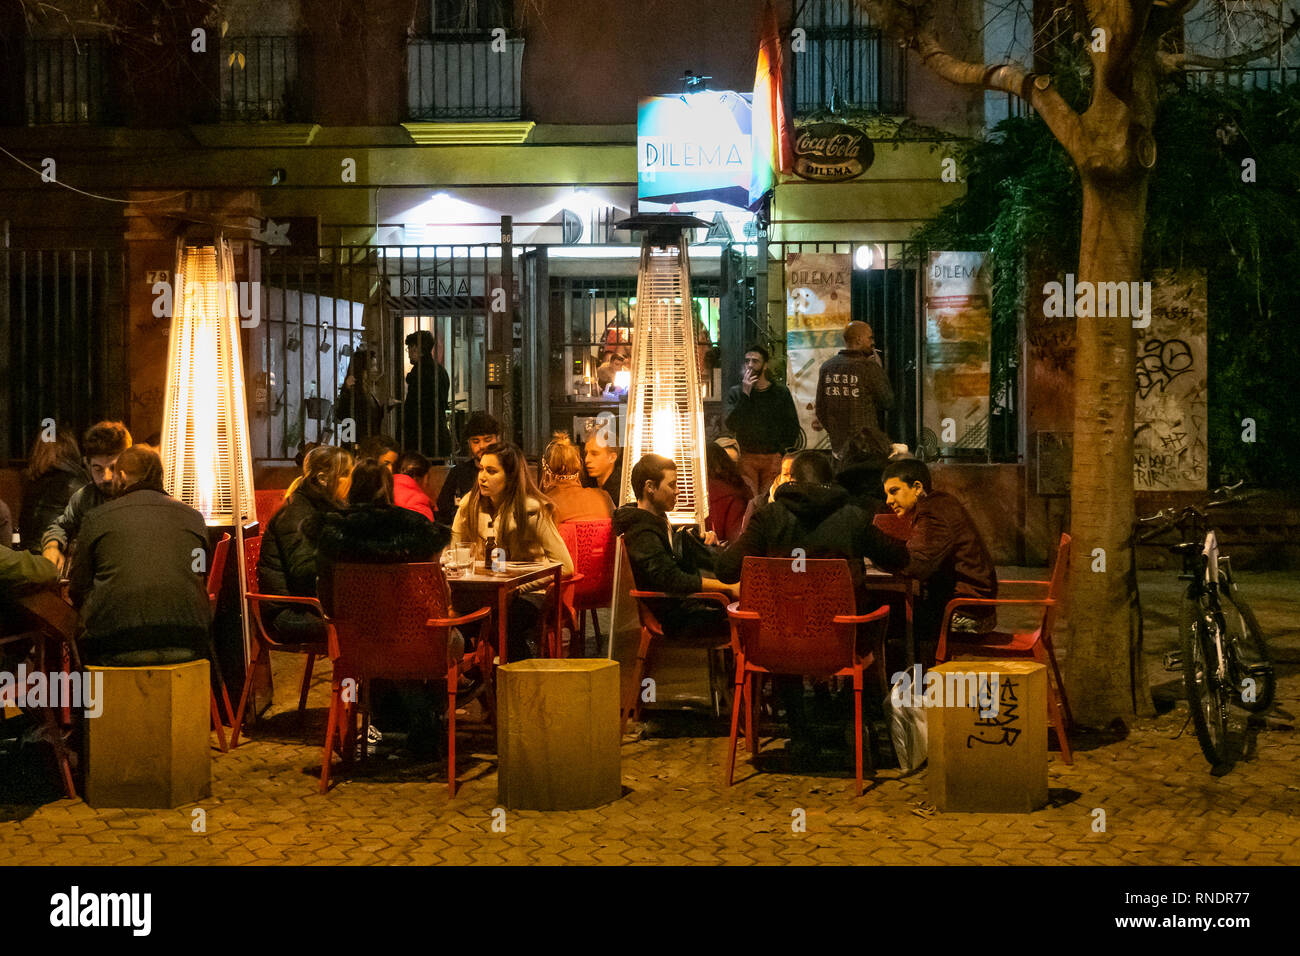 People having food and drinks at an outdoor cafe in the Alameda de Hercules in Seville, Spain Stock Photo